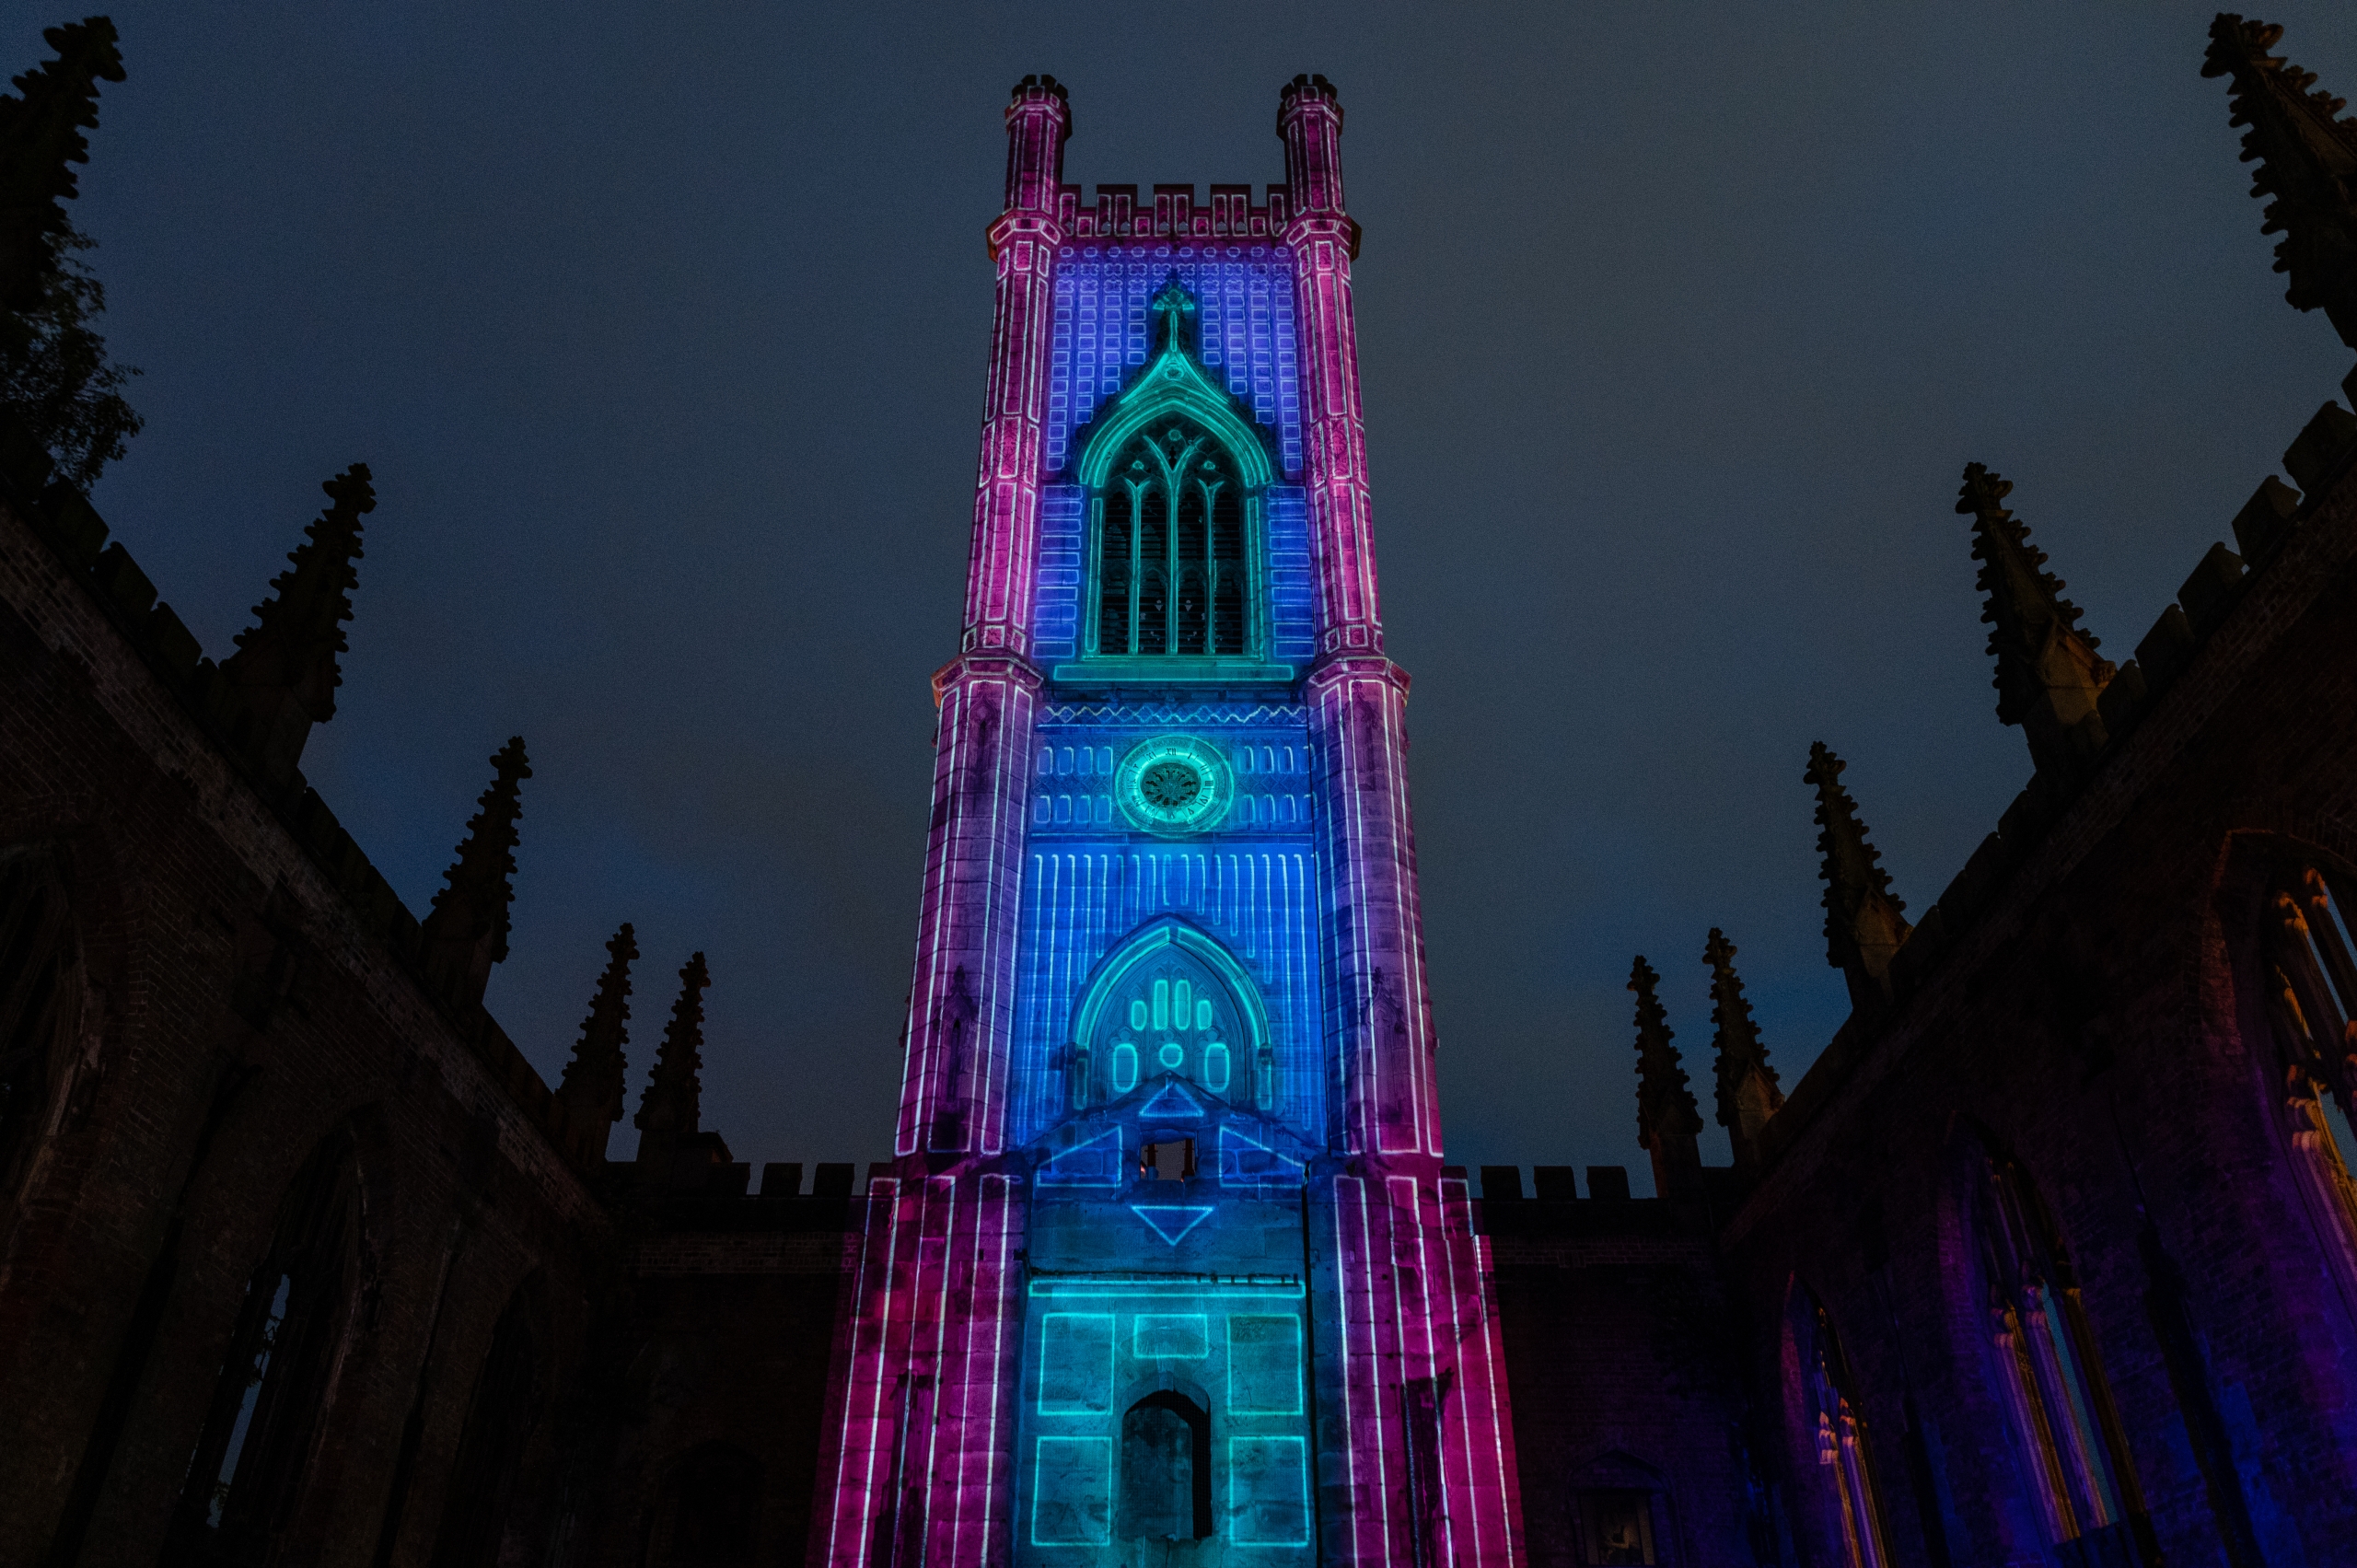 LightNight at Bombed out church featuring the church tower at night lit up in blue and purple